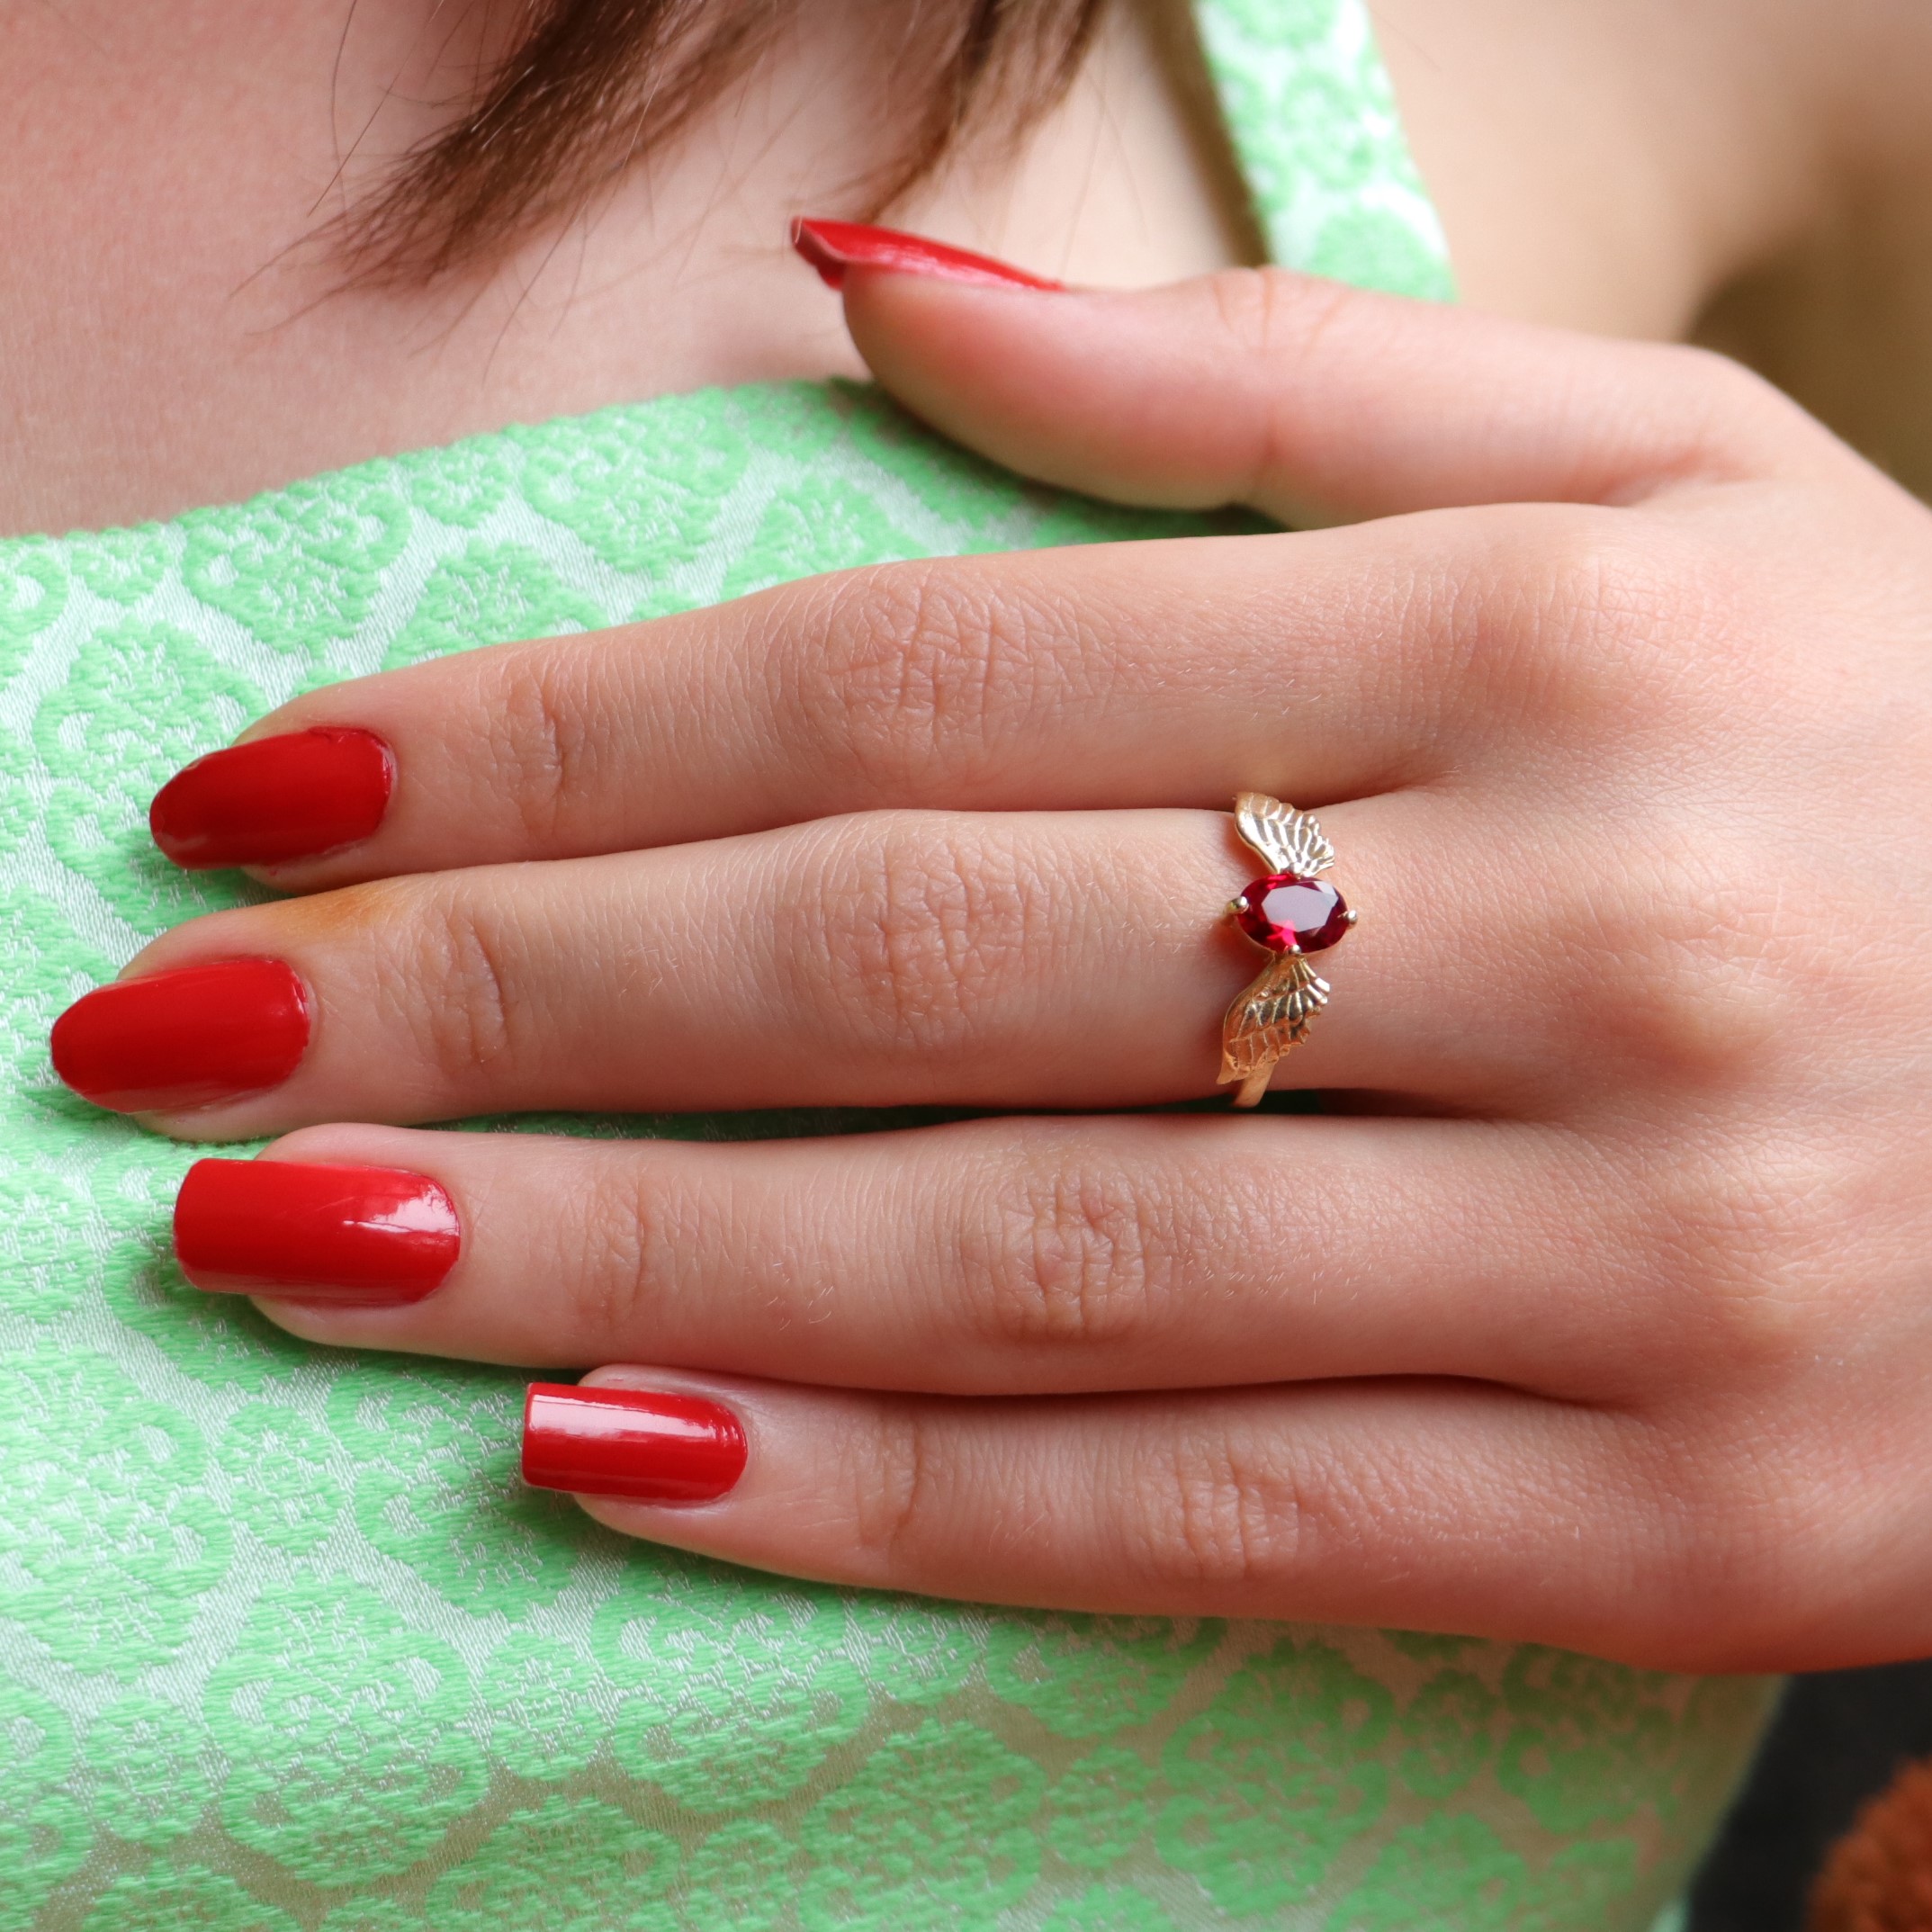 Lab. Ruby Stone Wing Ring 925 Sterling Silver Gold Plated